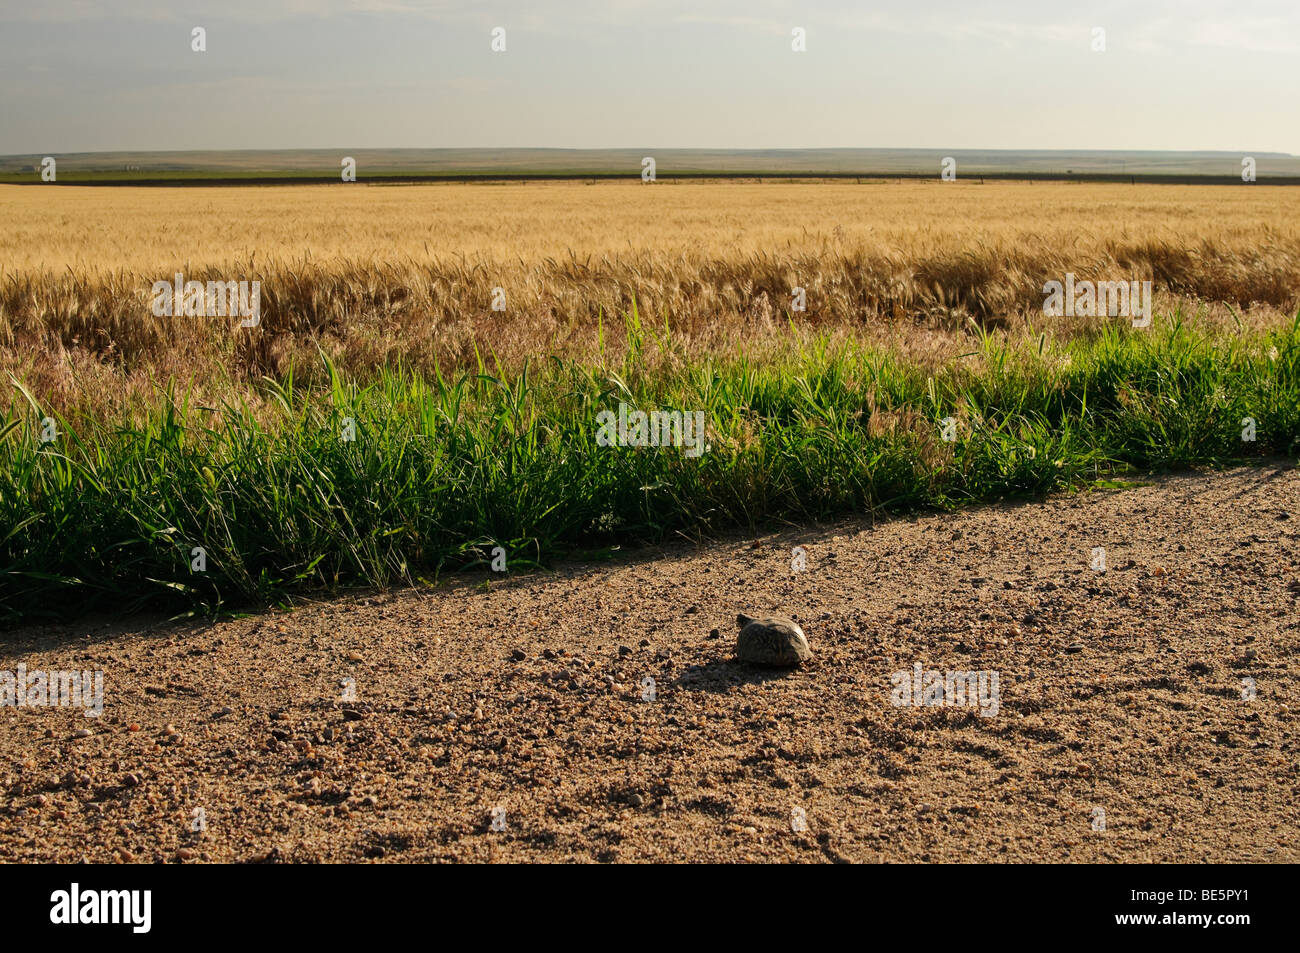 An ornate box turtle crosses the road in Western Kansas Stock Photo